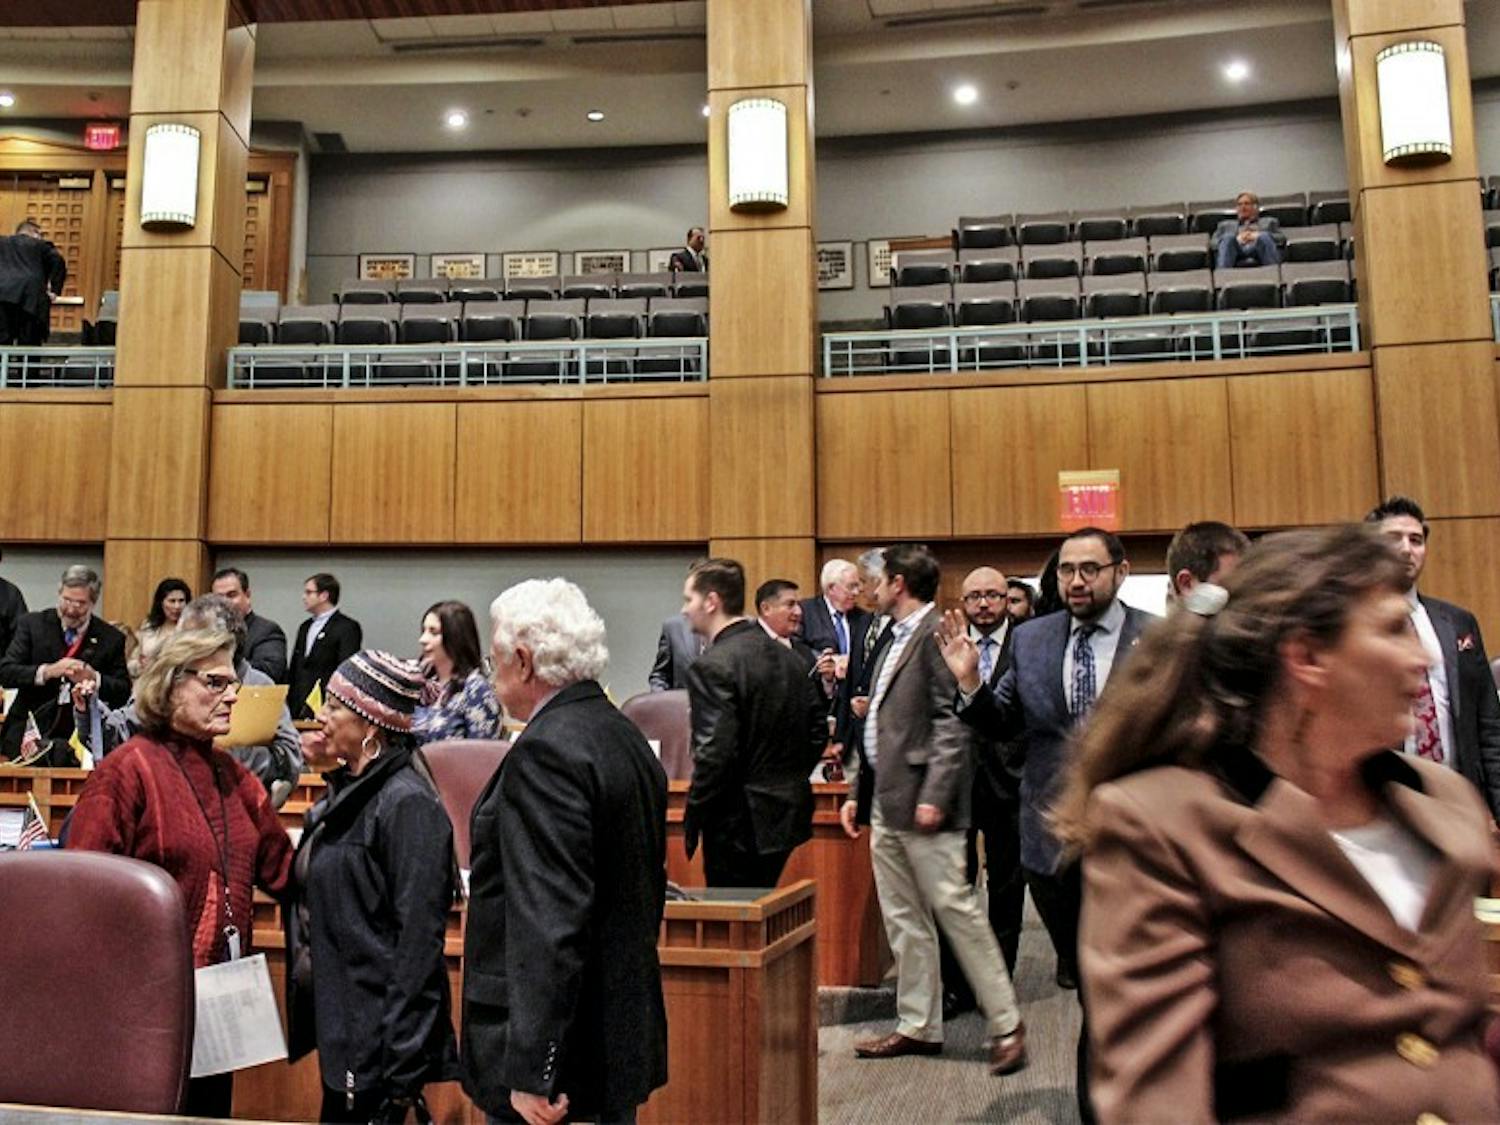 Legislators, reporters, photographers and the public mingle and mumble as they make their way out of the Senate Chamber at the Santa Fe Roundhouse on Feb. 15, 2018.&nbsp;